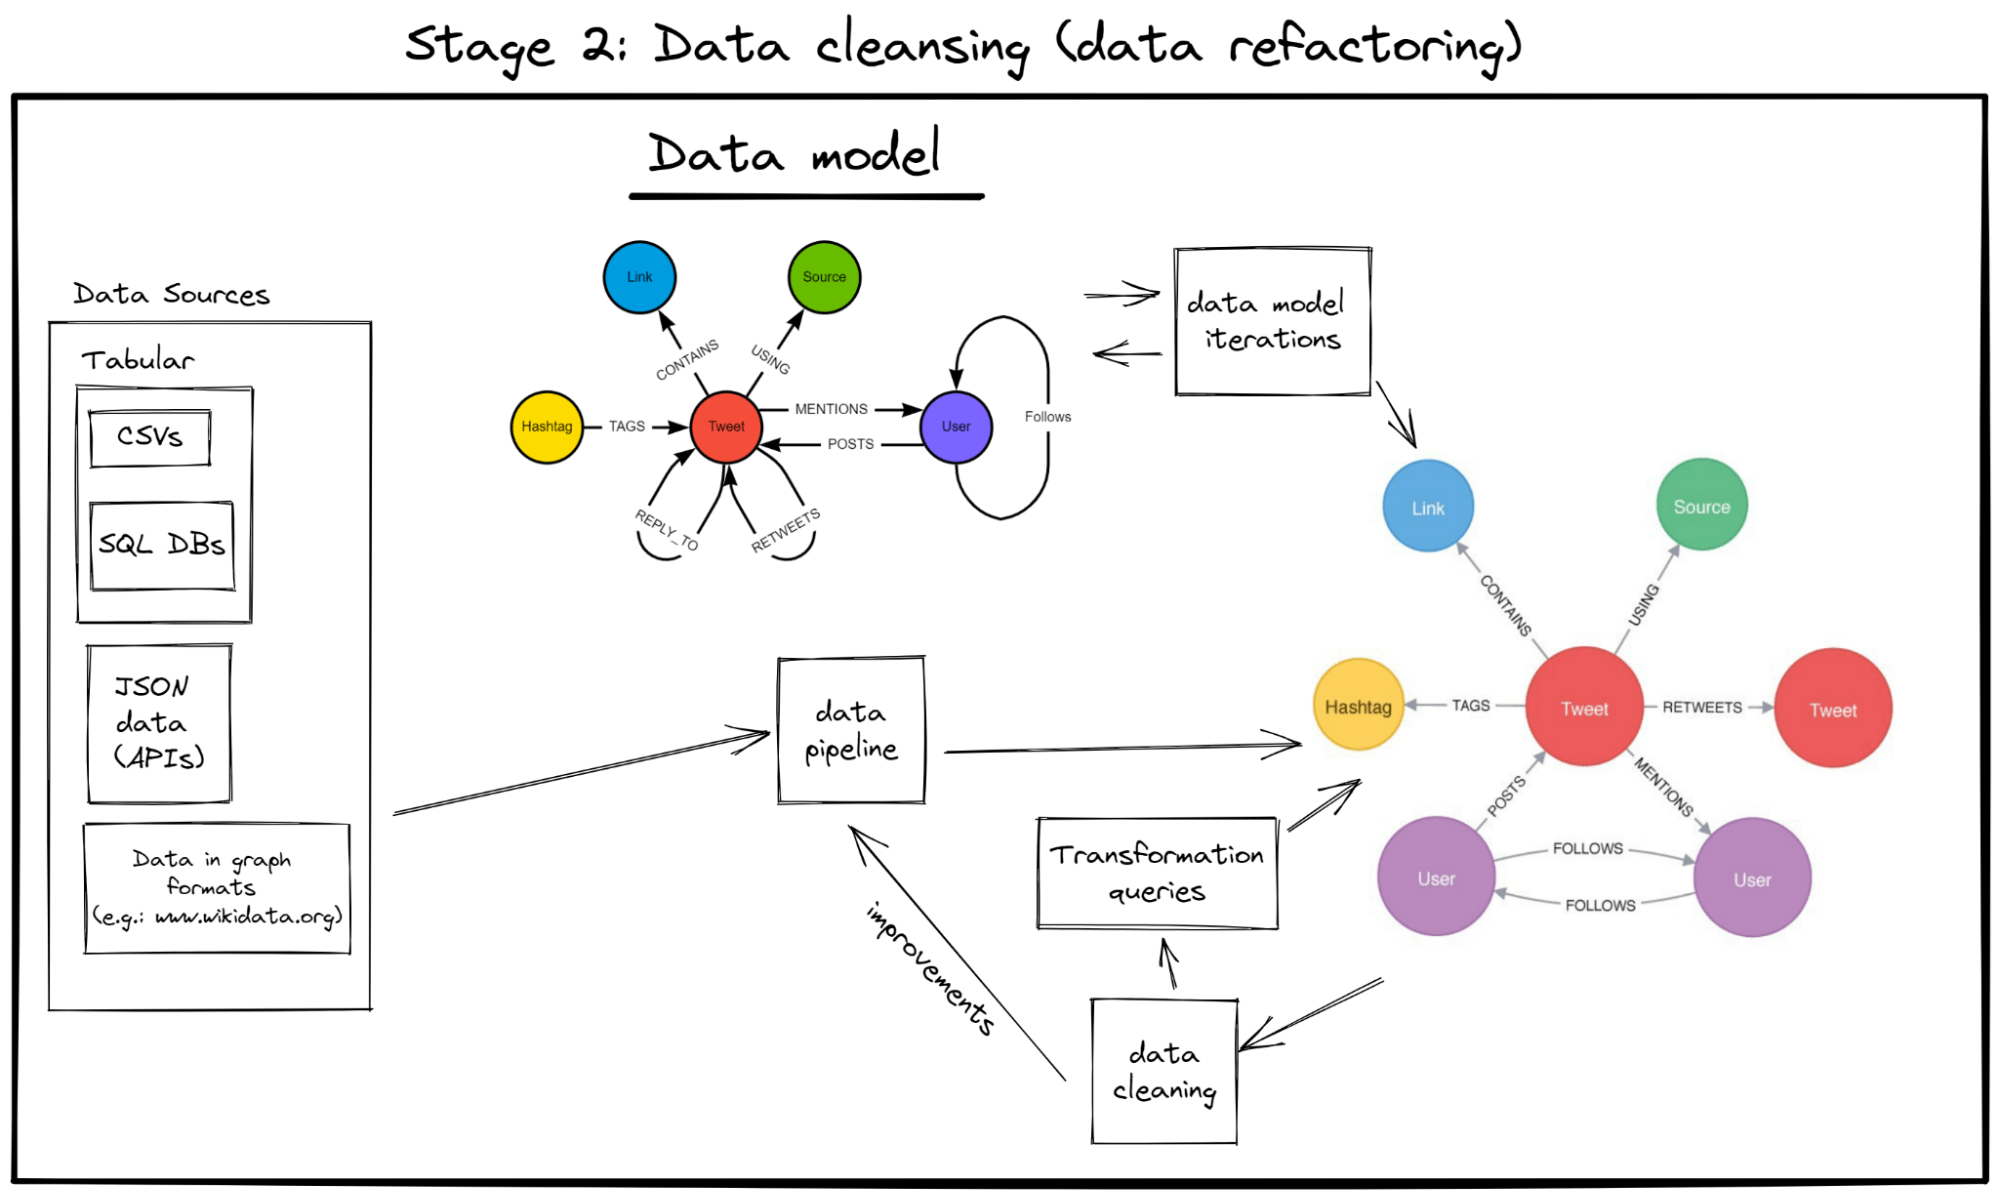 Figure 7 - An overview of the data refactoring workflow